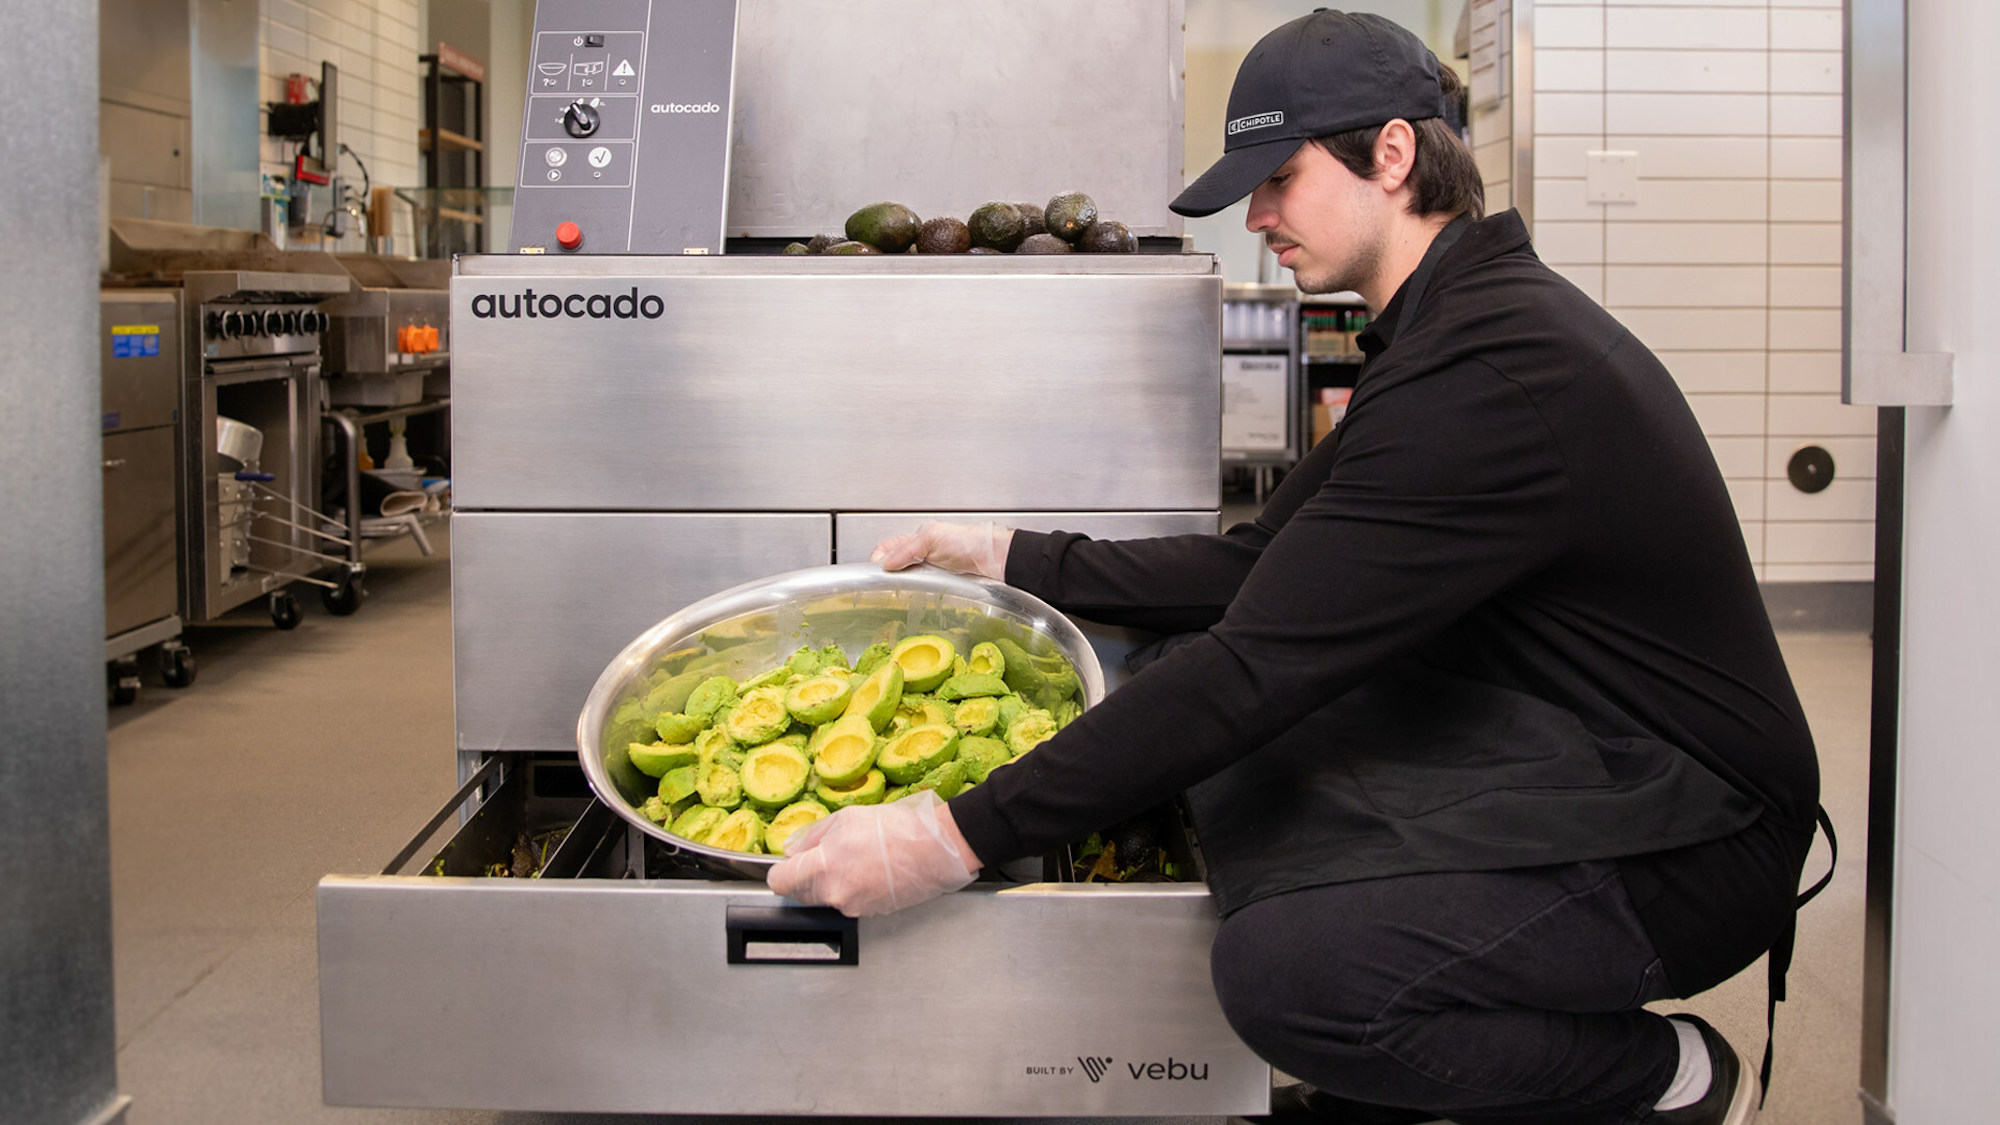 Chipotle is testing an avocado-pitting, -cutting, and -scooping robot